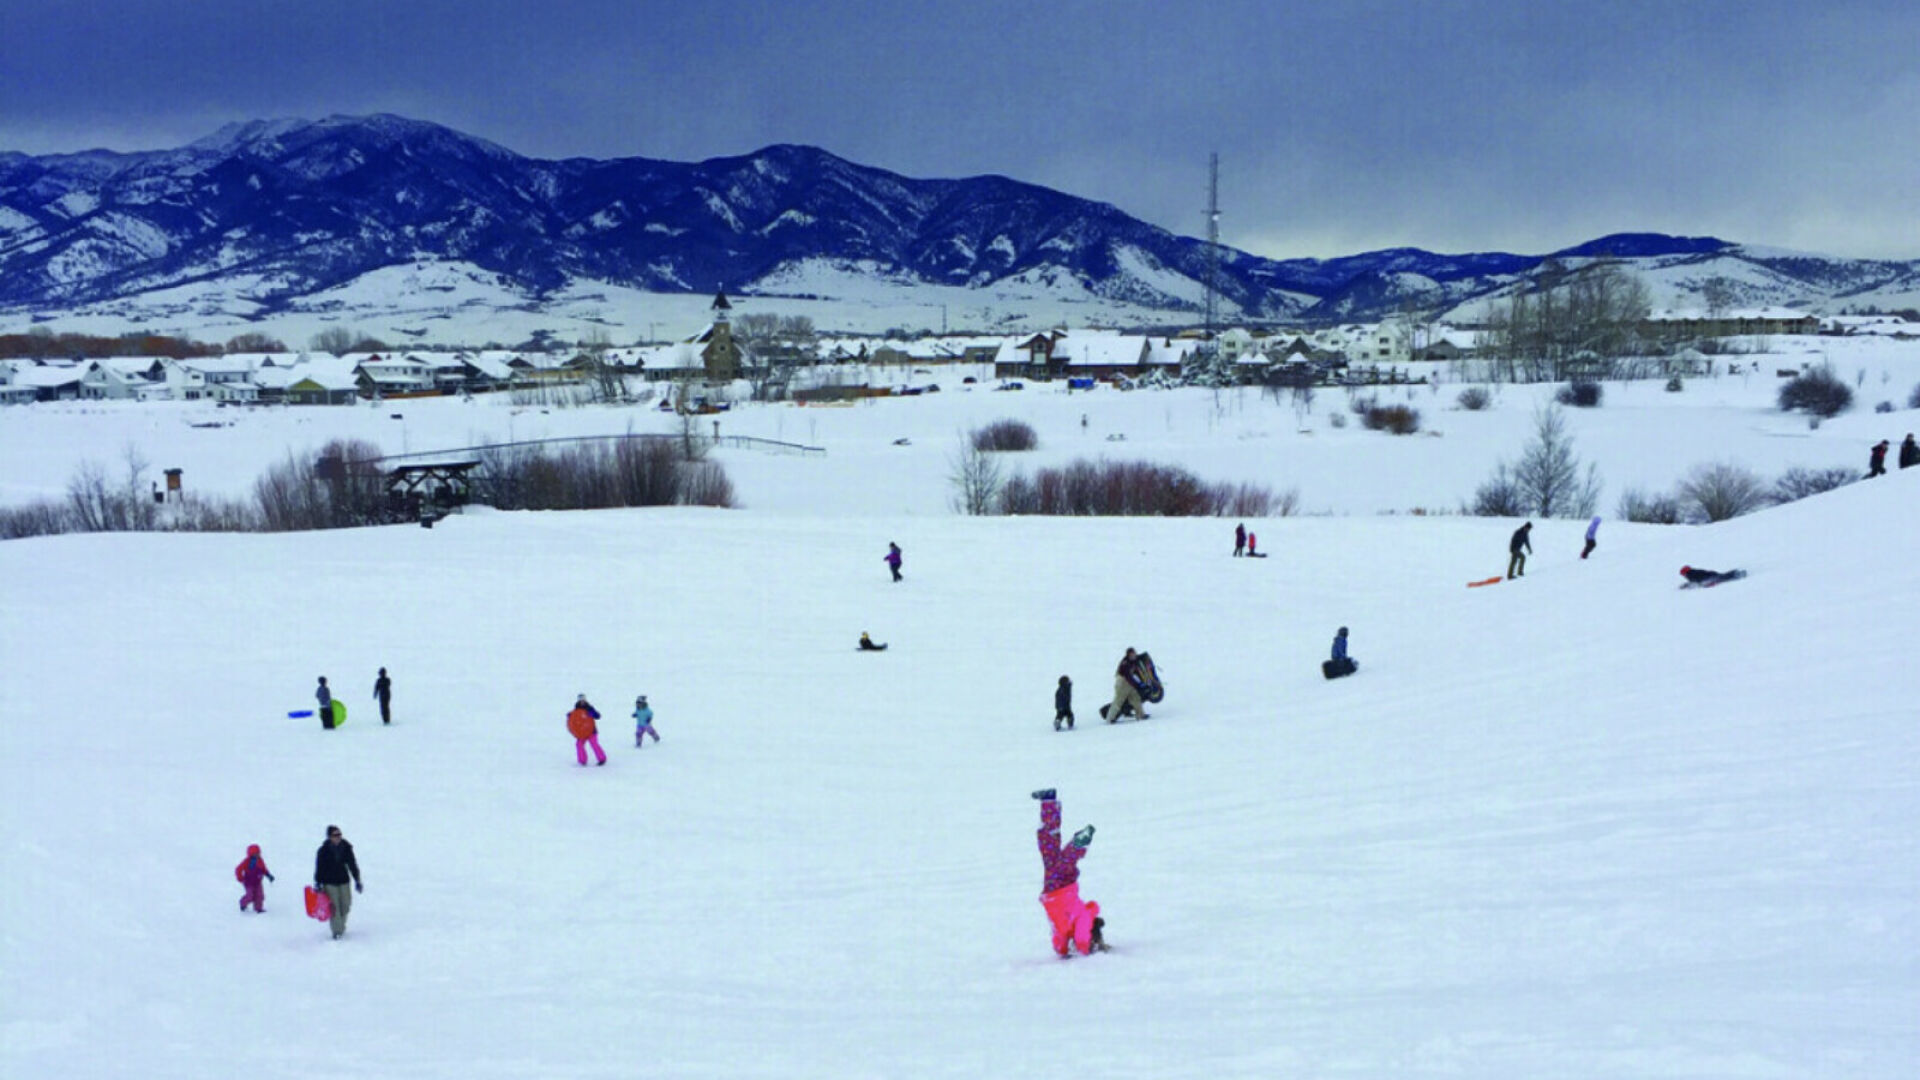 Visiting Bozeman this December? What to Do & How to Stay Safe